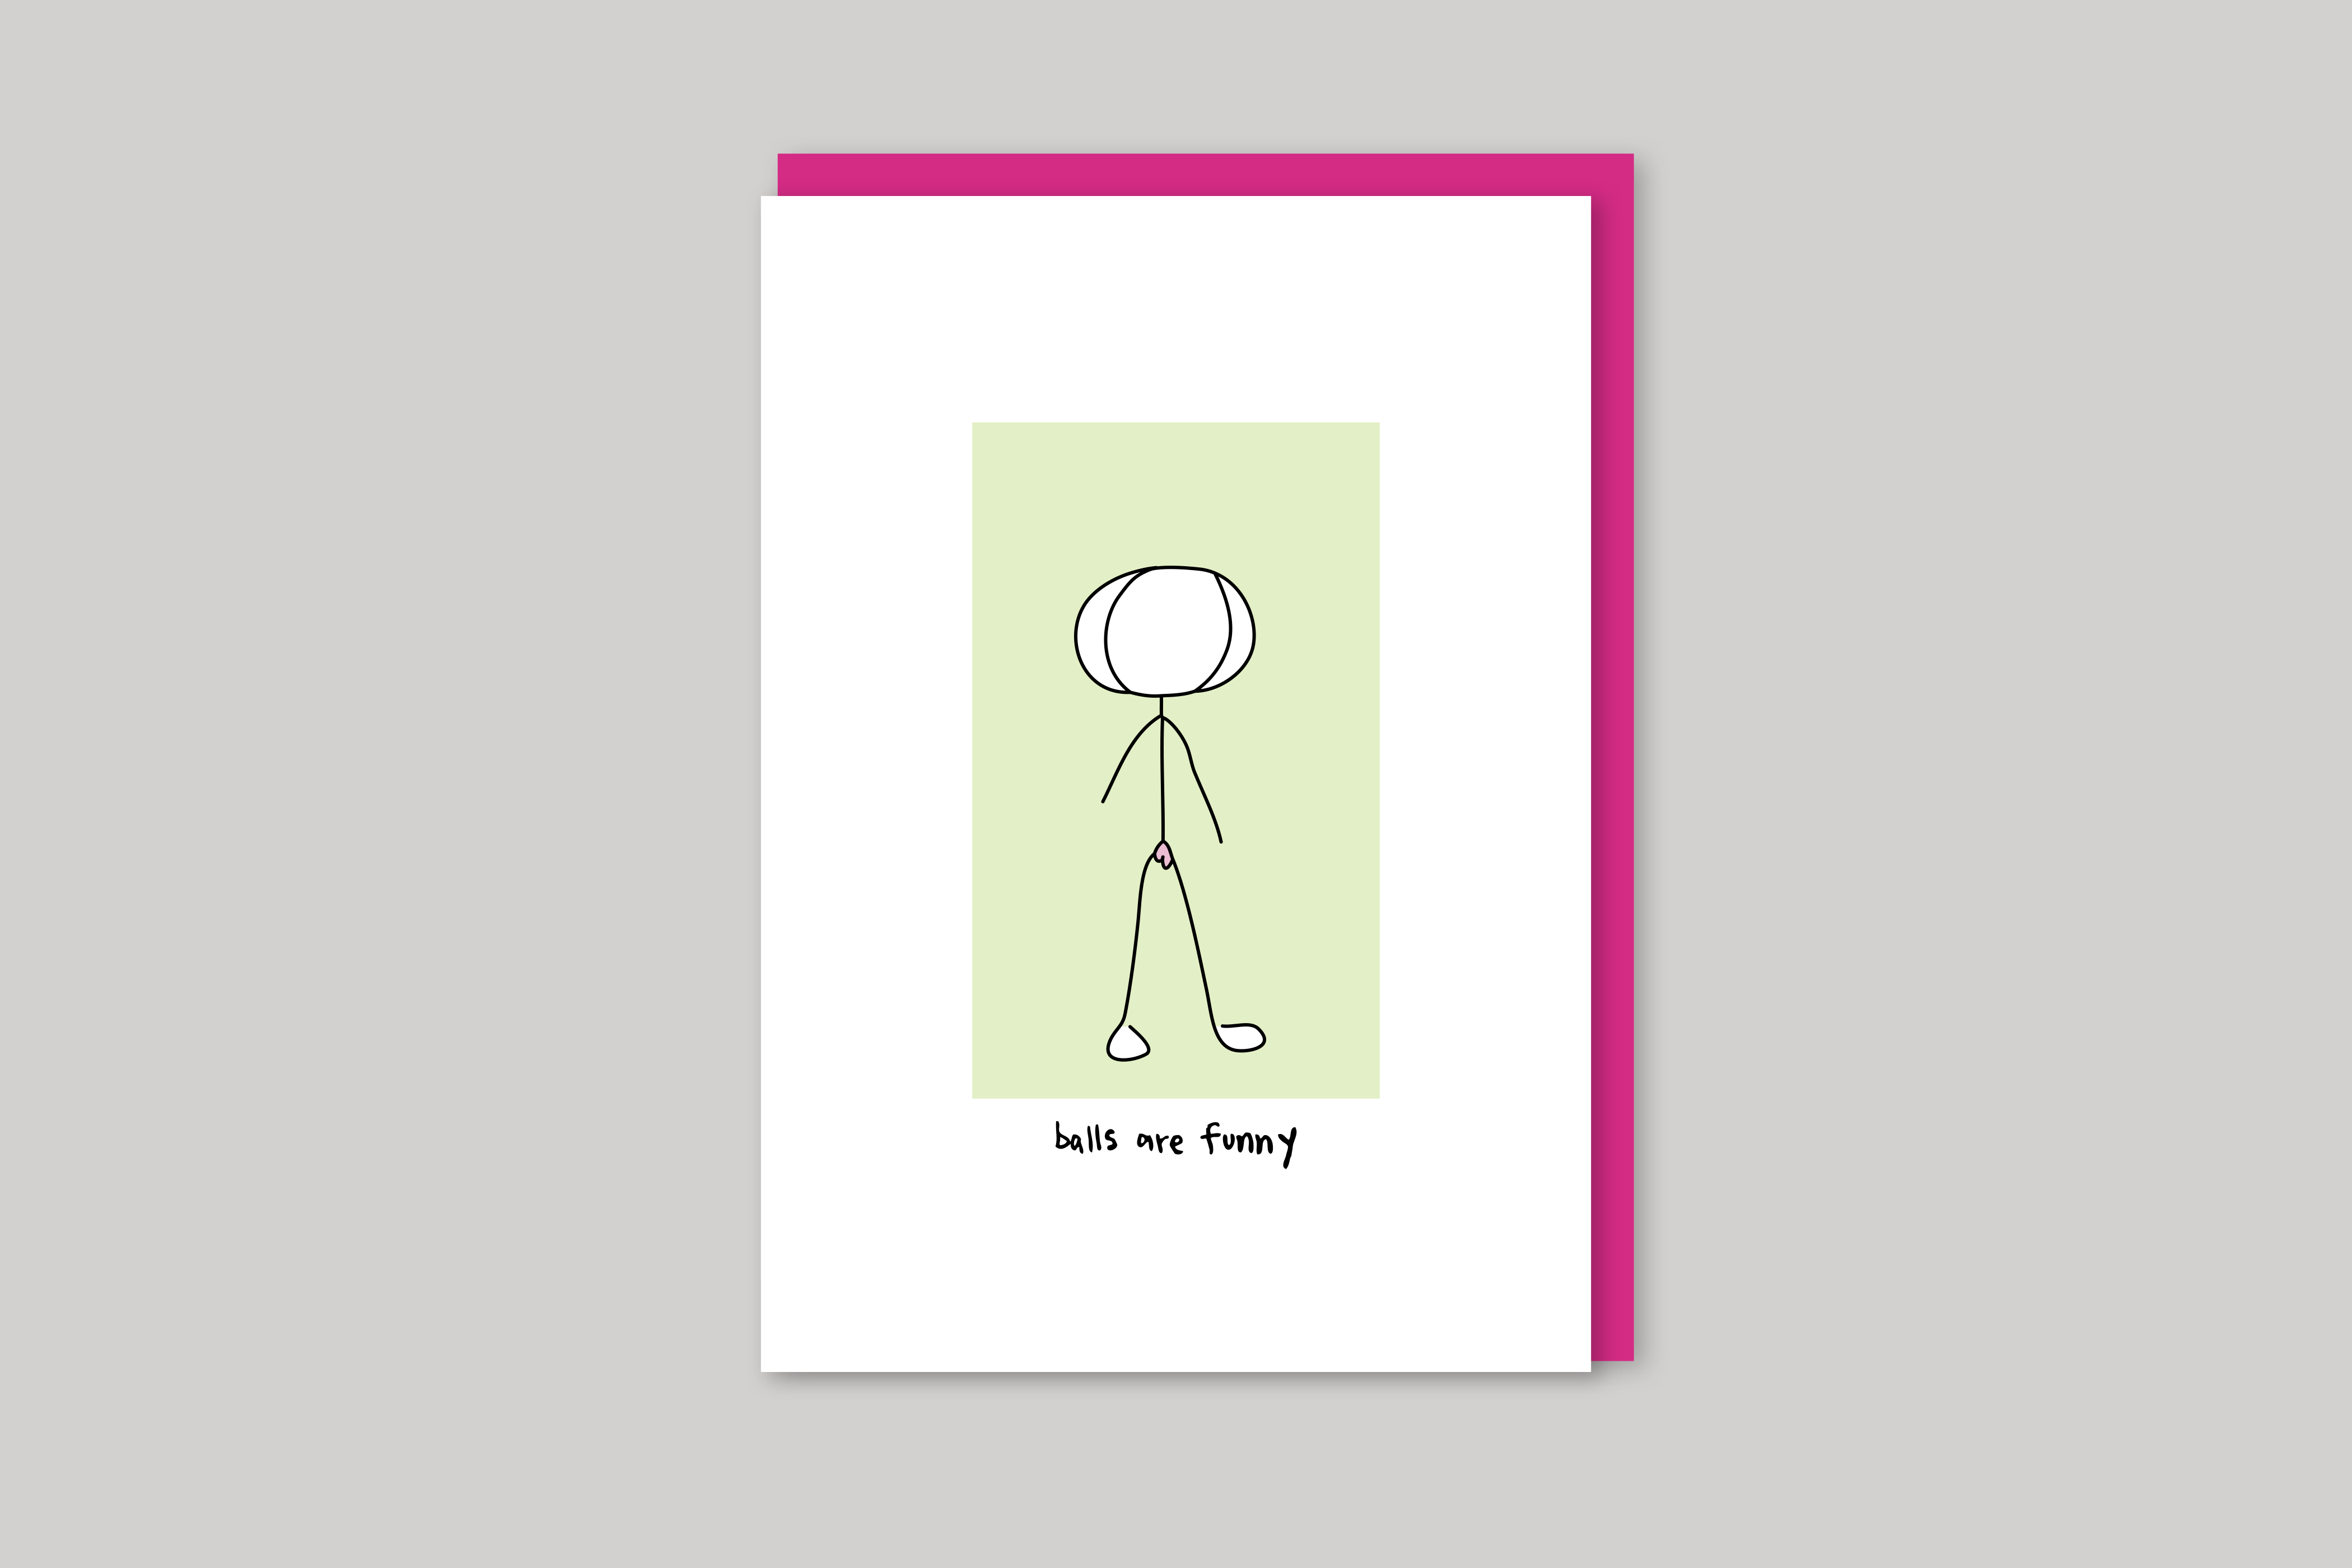 Balls Are Funny humorous illustration from Mean Cards range of greeting cards by Icon, back page.